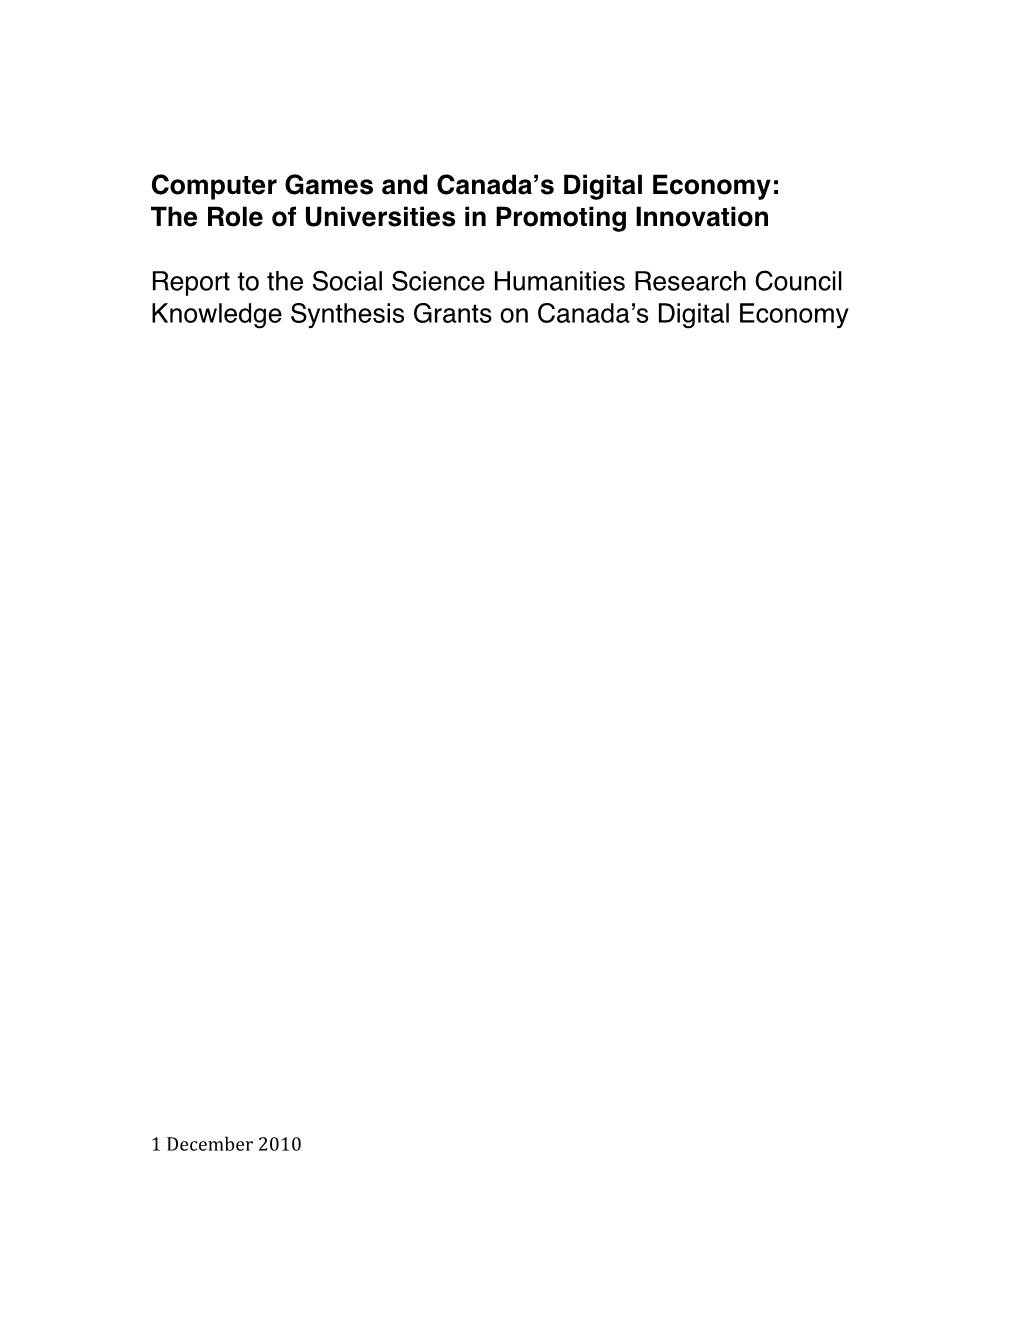 Computer Games and Canadaʼs Digital Economy: the Role of Universities in Promoting Innovation